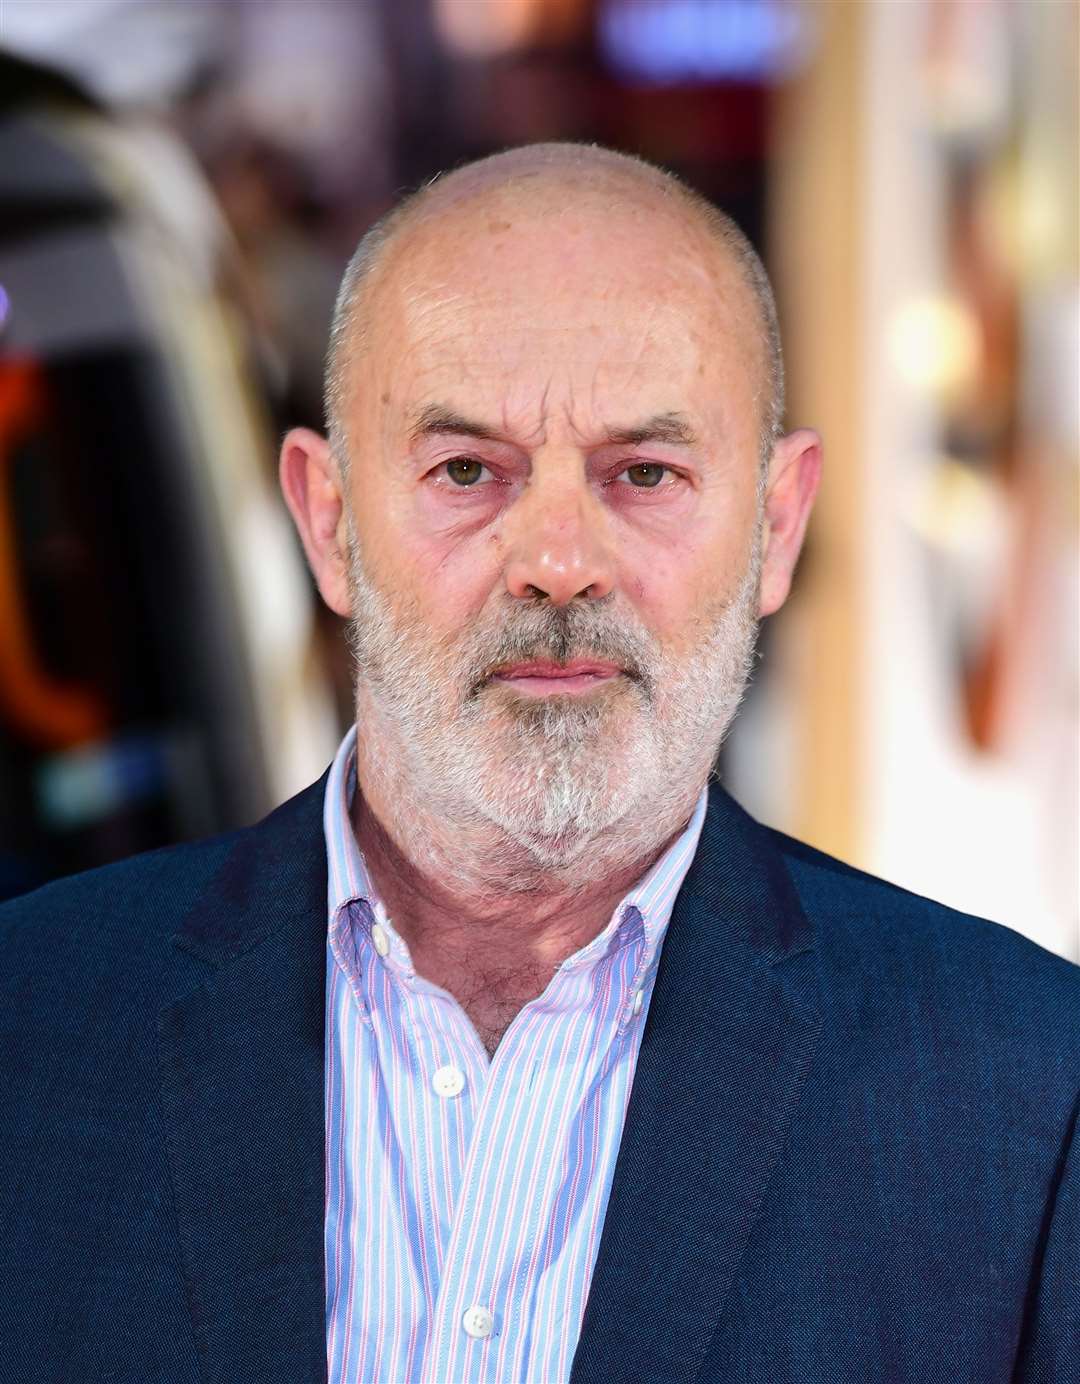 Keith Allen, father of singer Lily Allen, had also reached a settlement, the court heard (Ian West/PA)